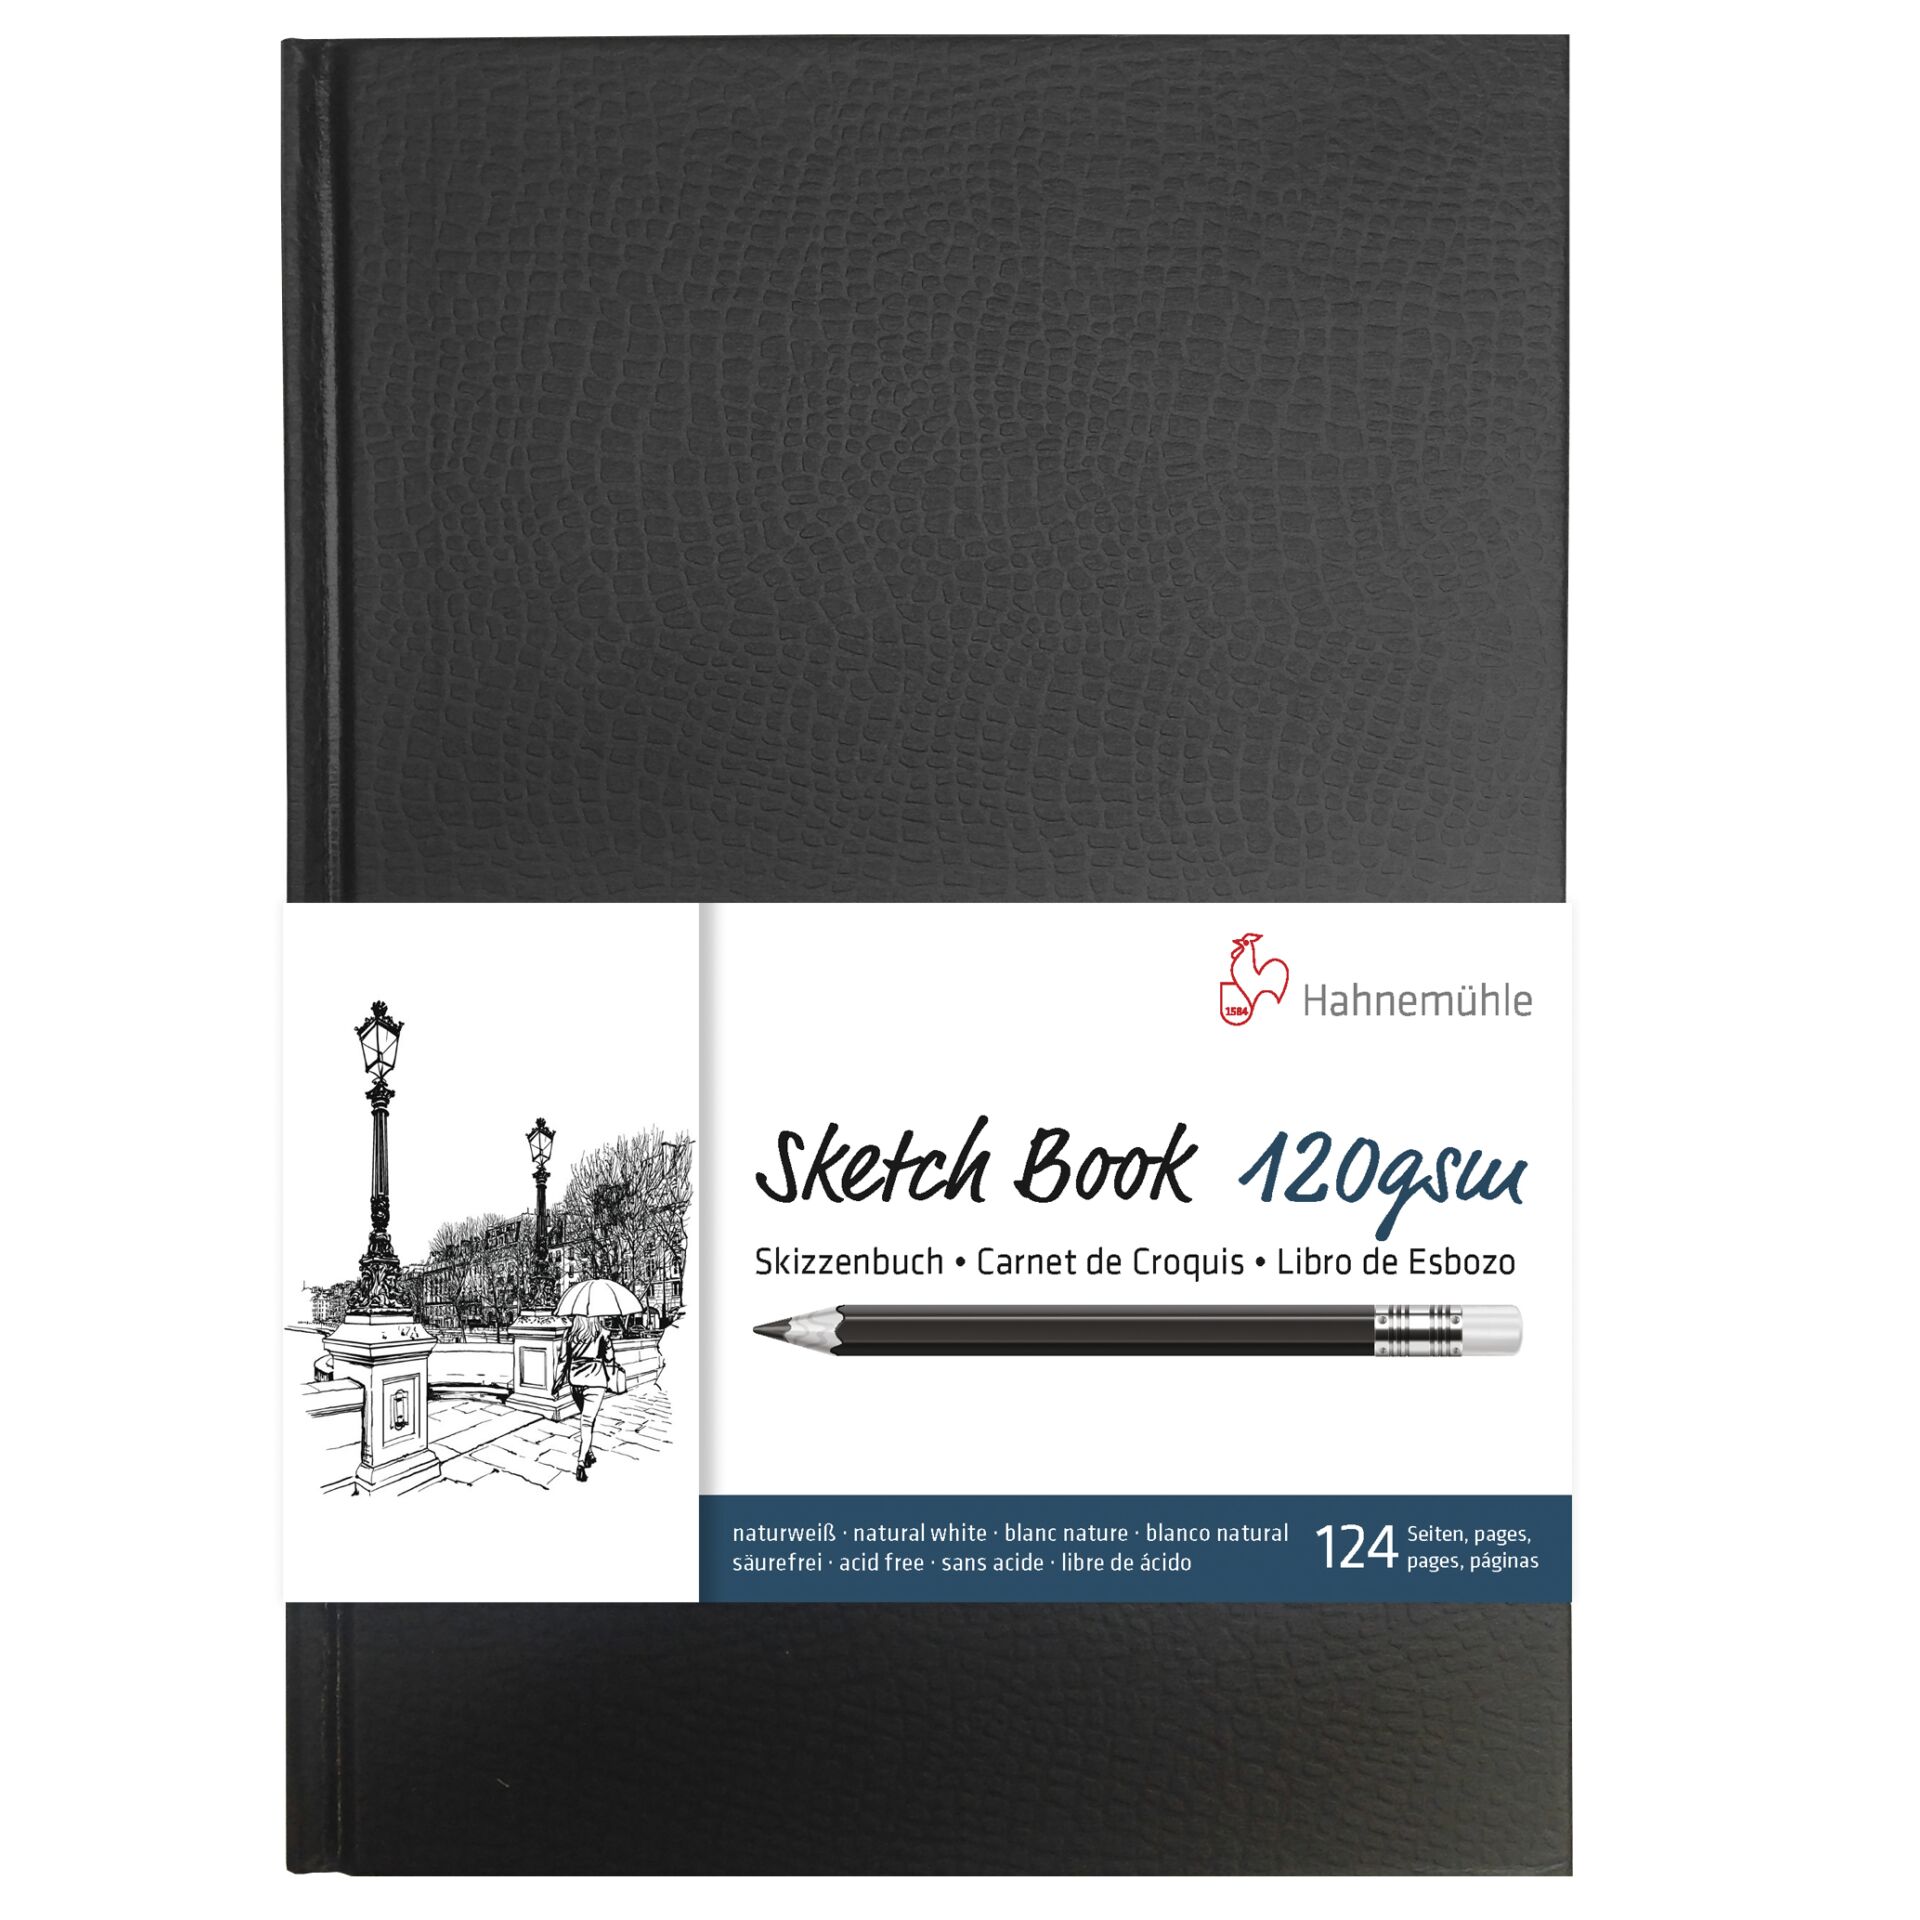 Hahnemühle Sketch Book A 4 62 Sheets 120 g